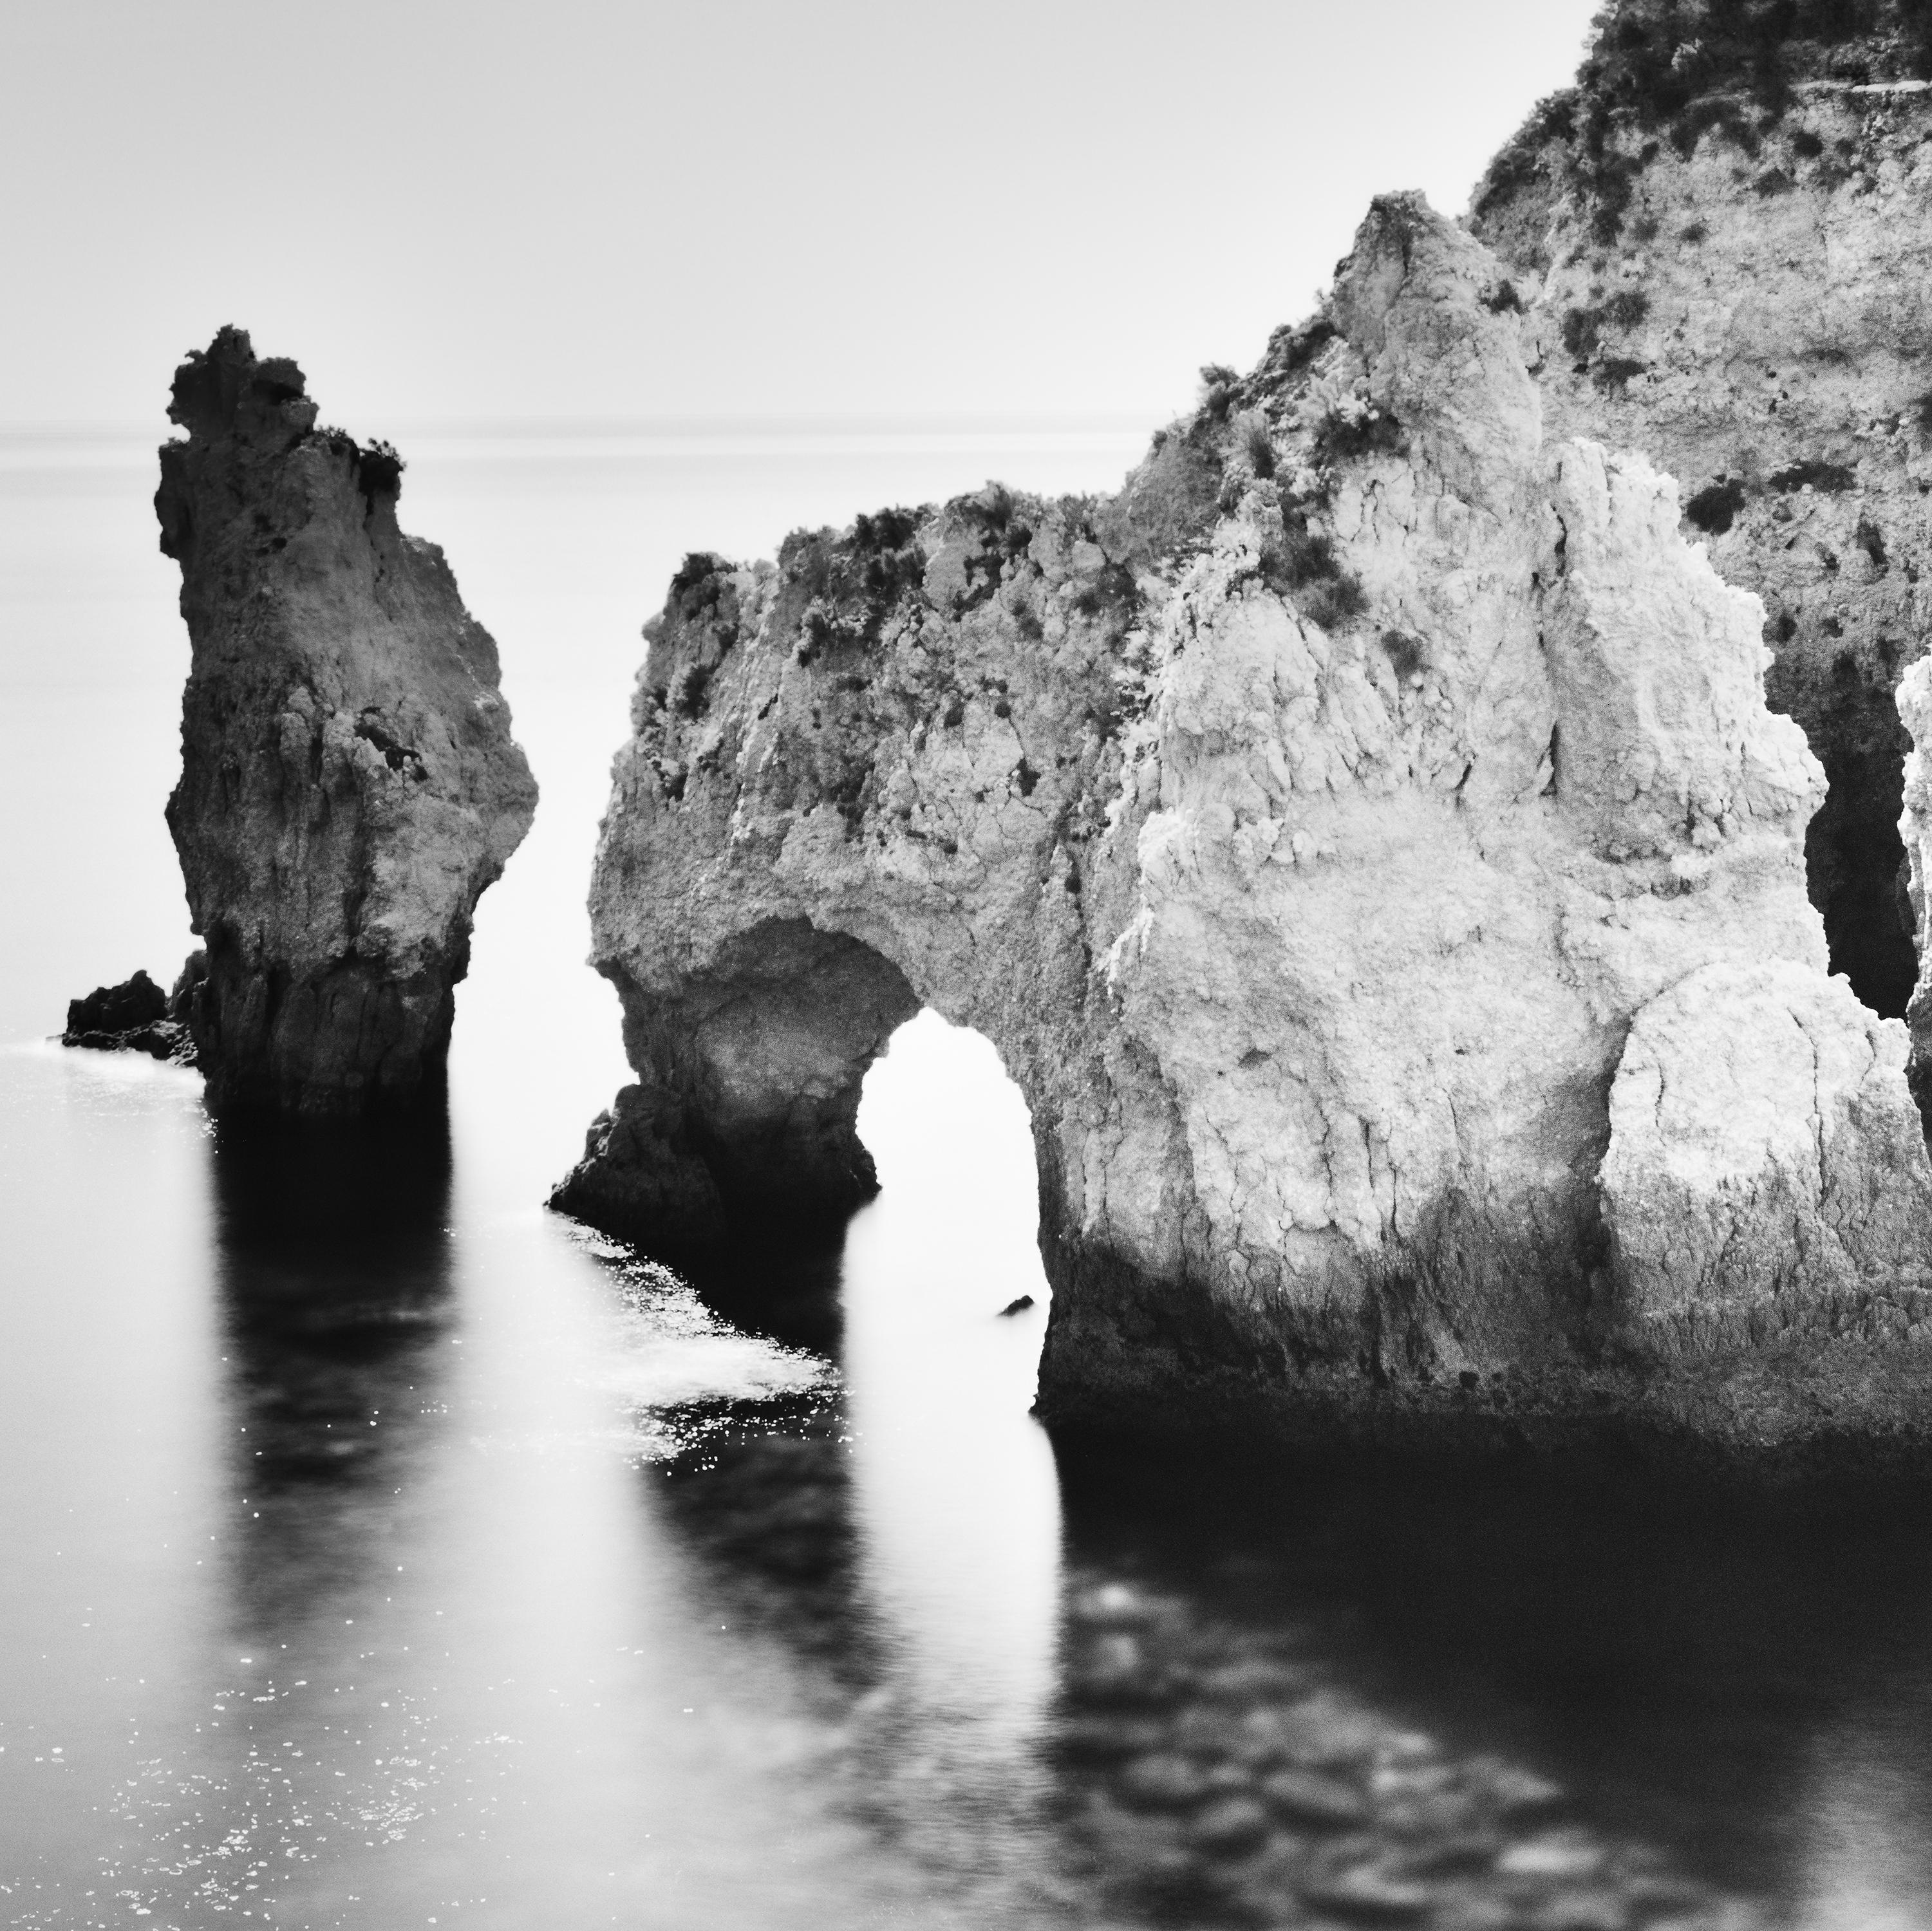 Black and white fine art waterscape - landscape photography print. Large Format analog print from Ponta Da Piedade, an impressive coastal landscape in Portugal. Archival pigment ink print, edition of 9. Signed, titled, dated and numbered by artist.